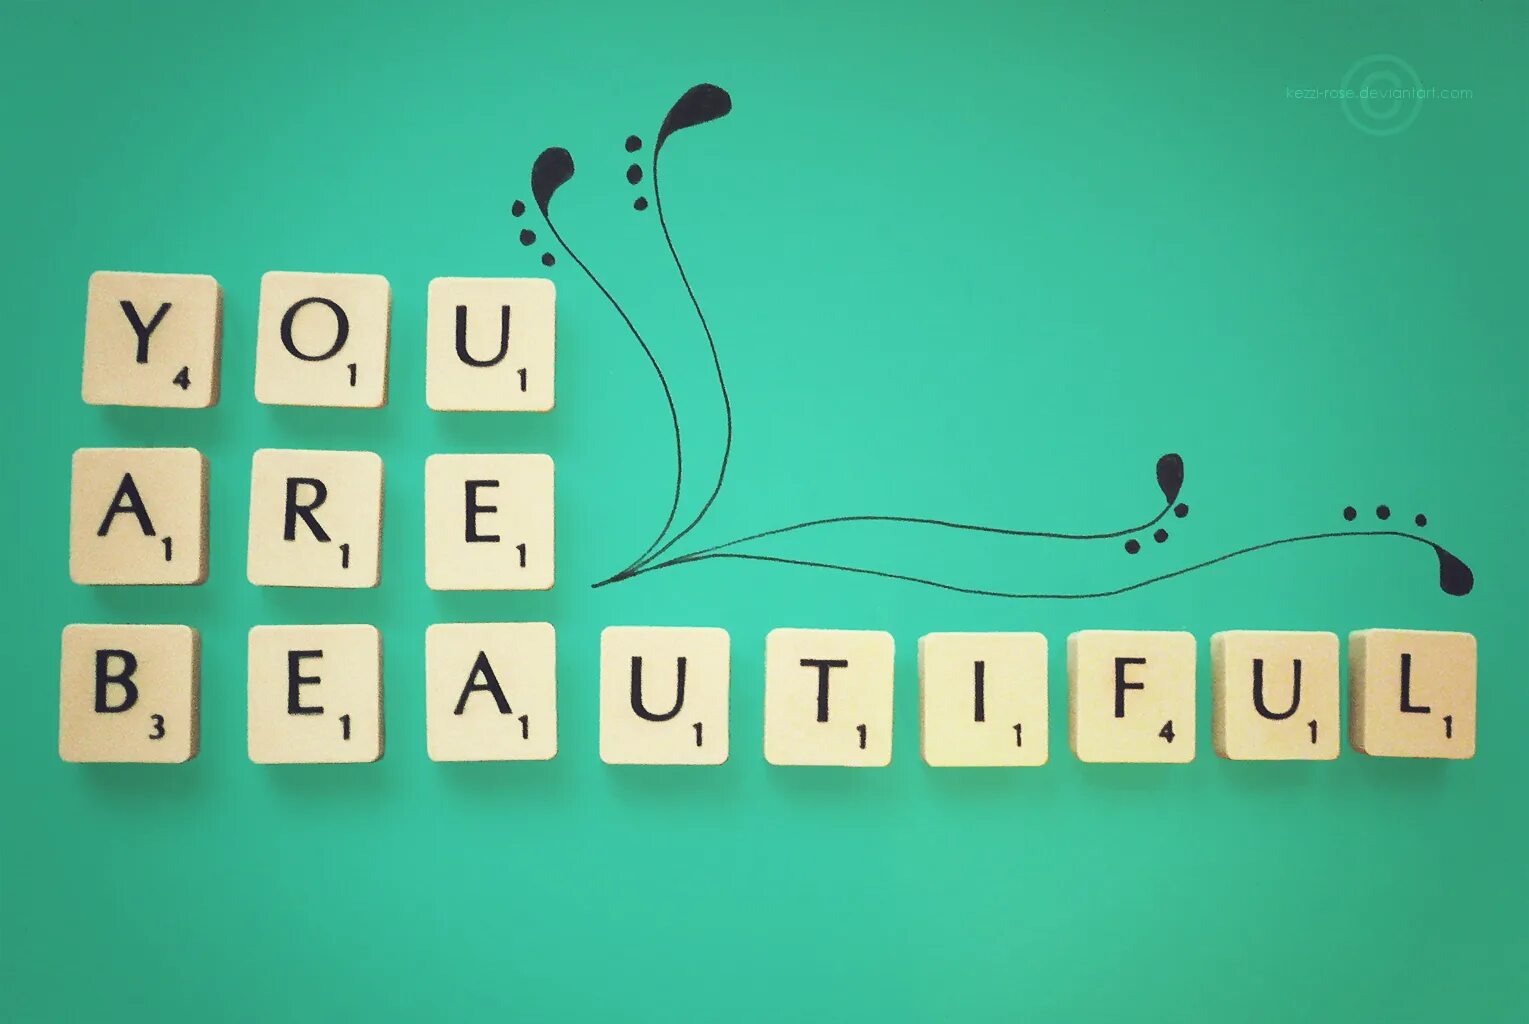 You are. You are picture. You are beautiful. You are q.